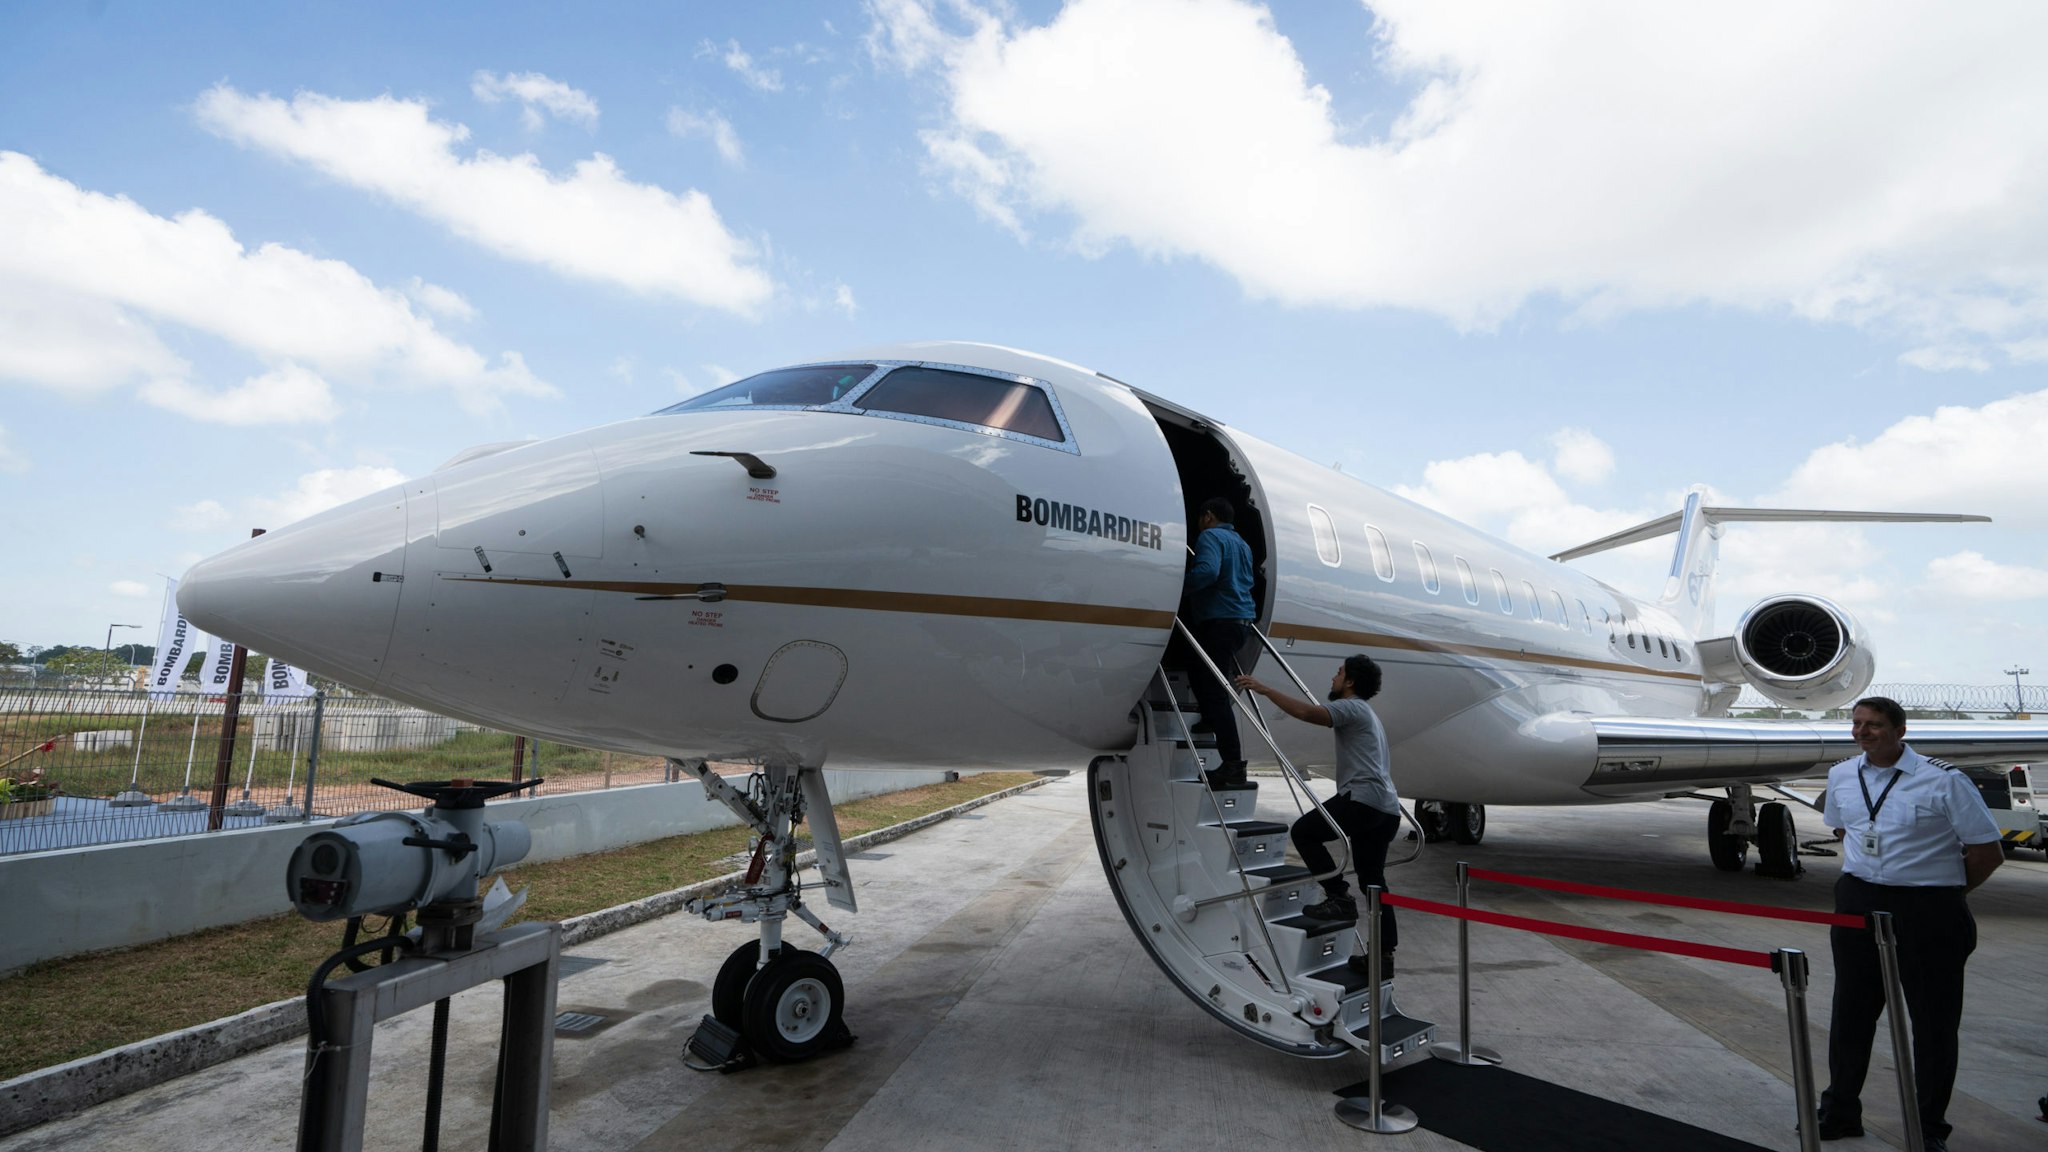 Attendees climb the airstair to a Bombardier Inc. Global 6000 business jet on display during a media event at Seletar Aerospace Heights in Singapore, on Wednesday, Feb. 27, 2019. Bombardier is more than doubling the size of its bond buybacks to as much as $1.83 billion after raising twice the amount initially expected in its new debt sale on Thursday amid a red-hot junk-bond market. Photographer: Nicky Loh/Bloomberg via Getty Images